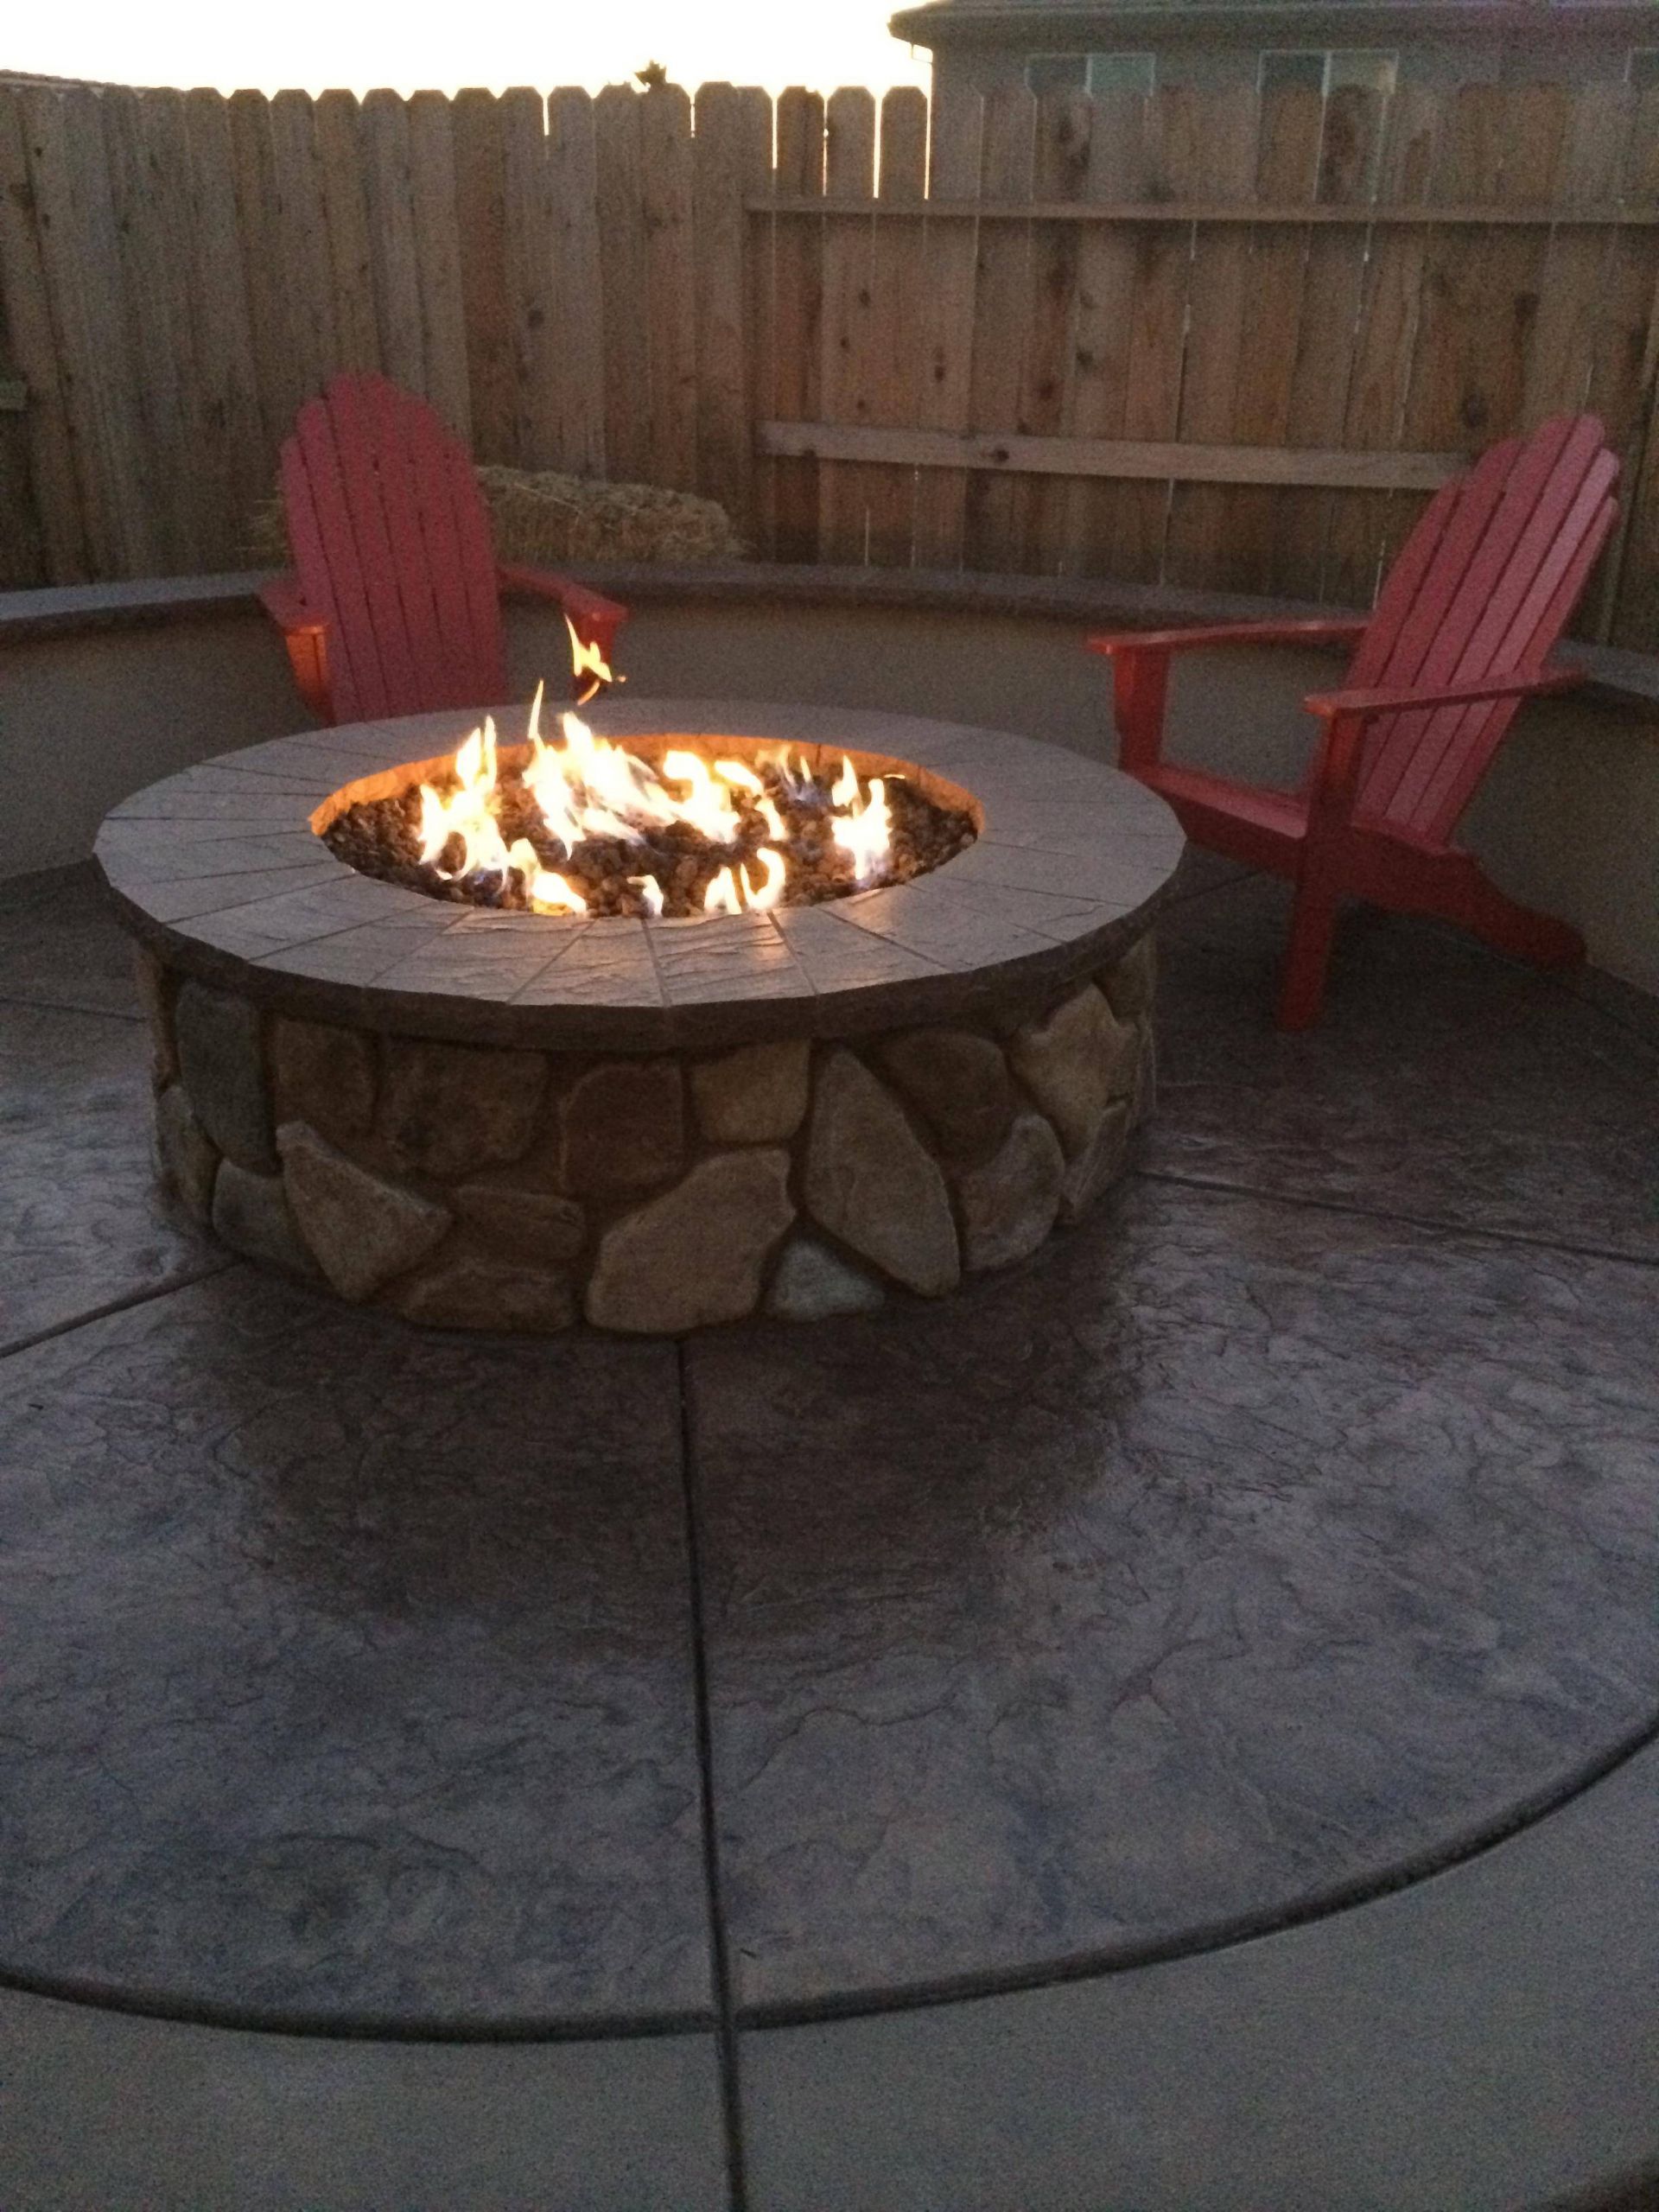 DIY Outdoor Gas Fireplace
 fireplace How can I my gas fire pit to have a larger